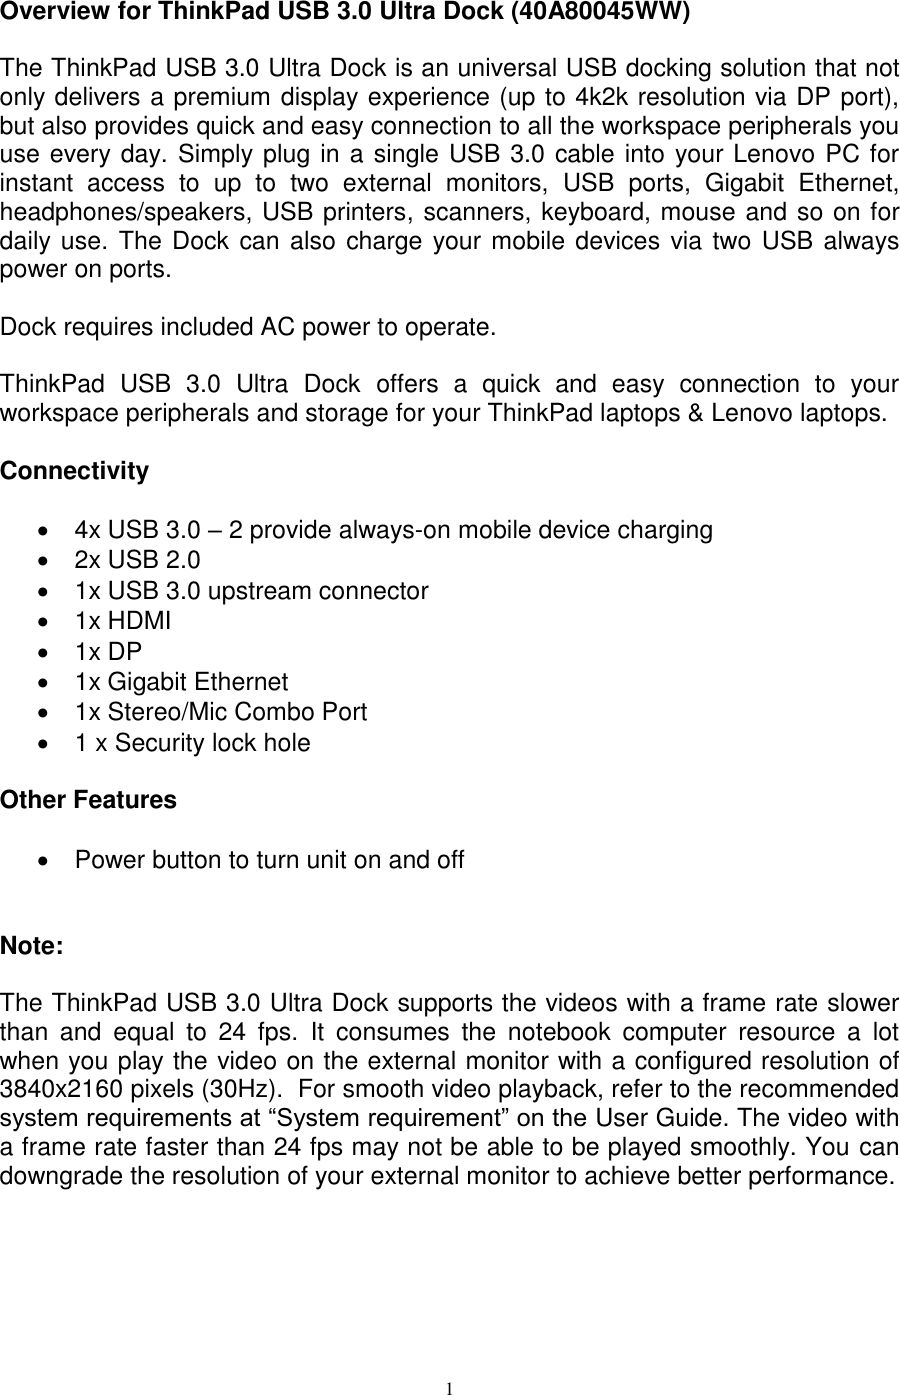 Page 1 of 5 - Lenovo Tp Usb3 Ultradock 40A80045 OVERVIEW User Manual L570 (type 20J8, 20J9) Laptops (Think Pad) - Type 20J8